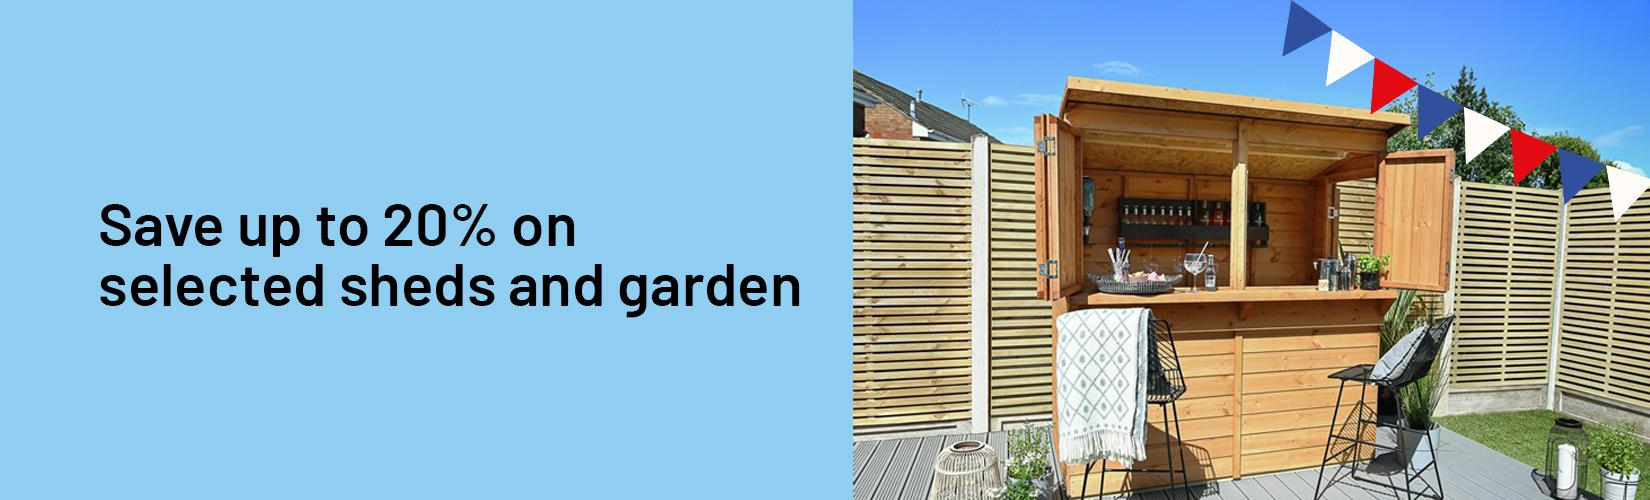 Save up to 20% on selected Sheds and Garden.